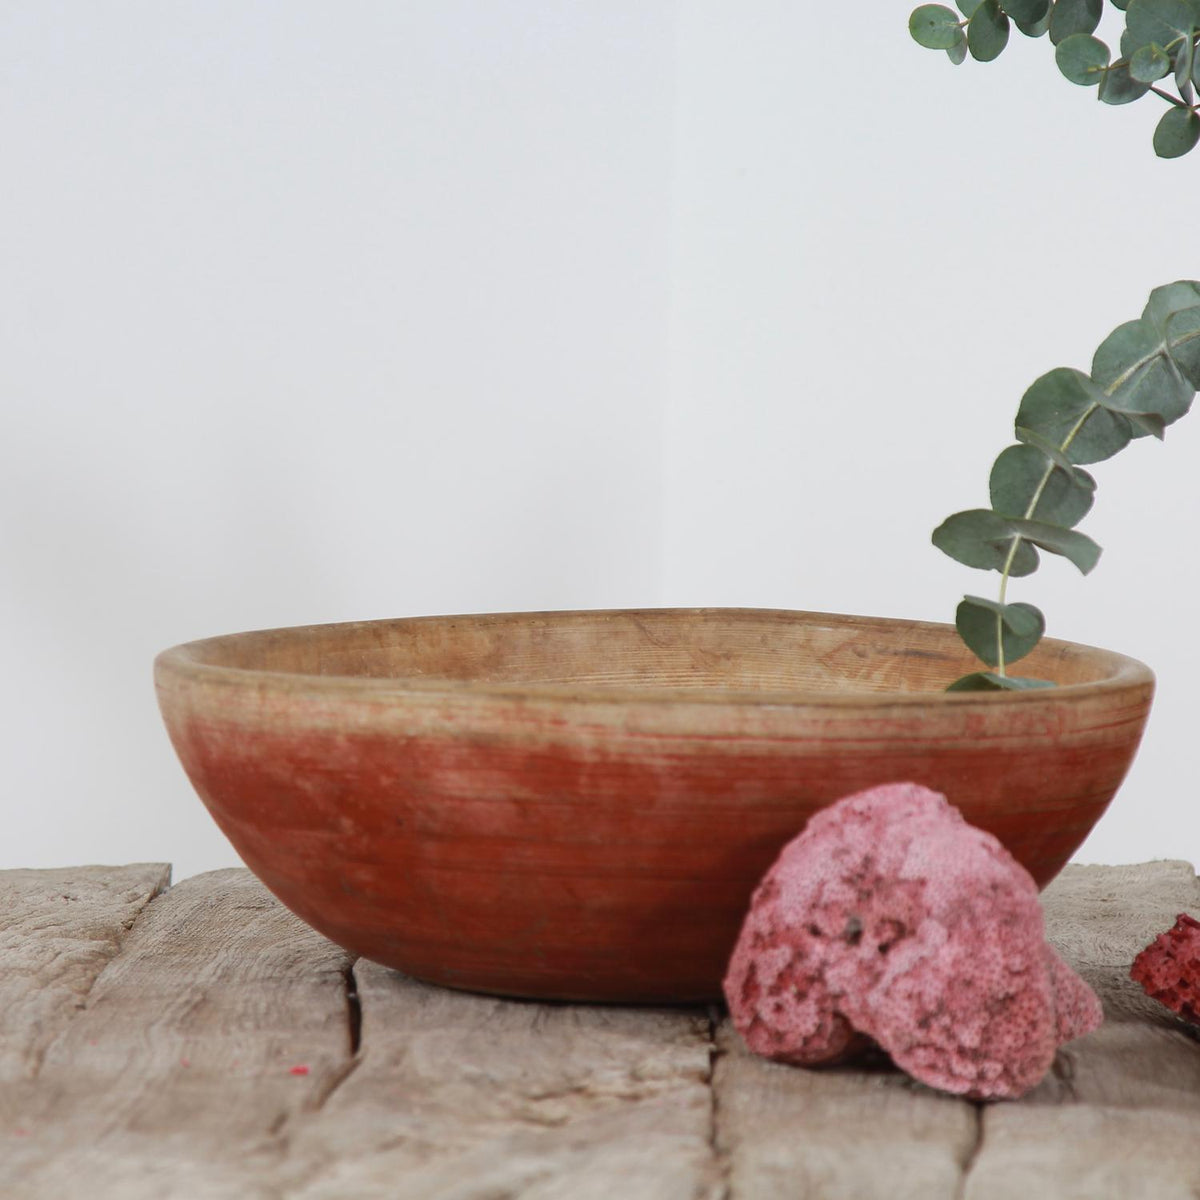 Mid-19th Century Authentic Swedish Turned Wooden Bowl